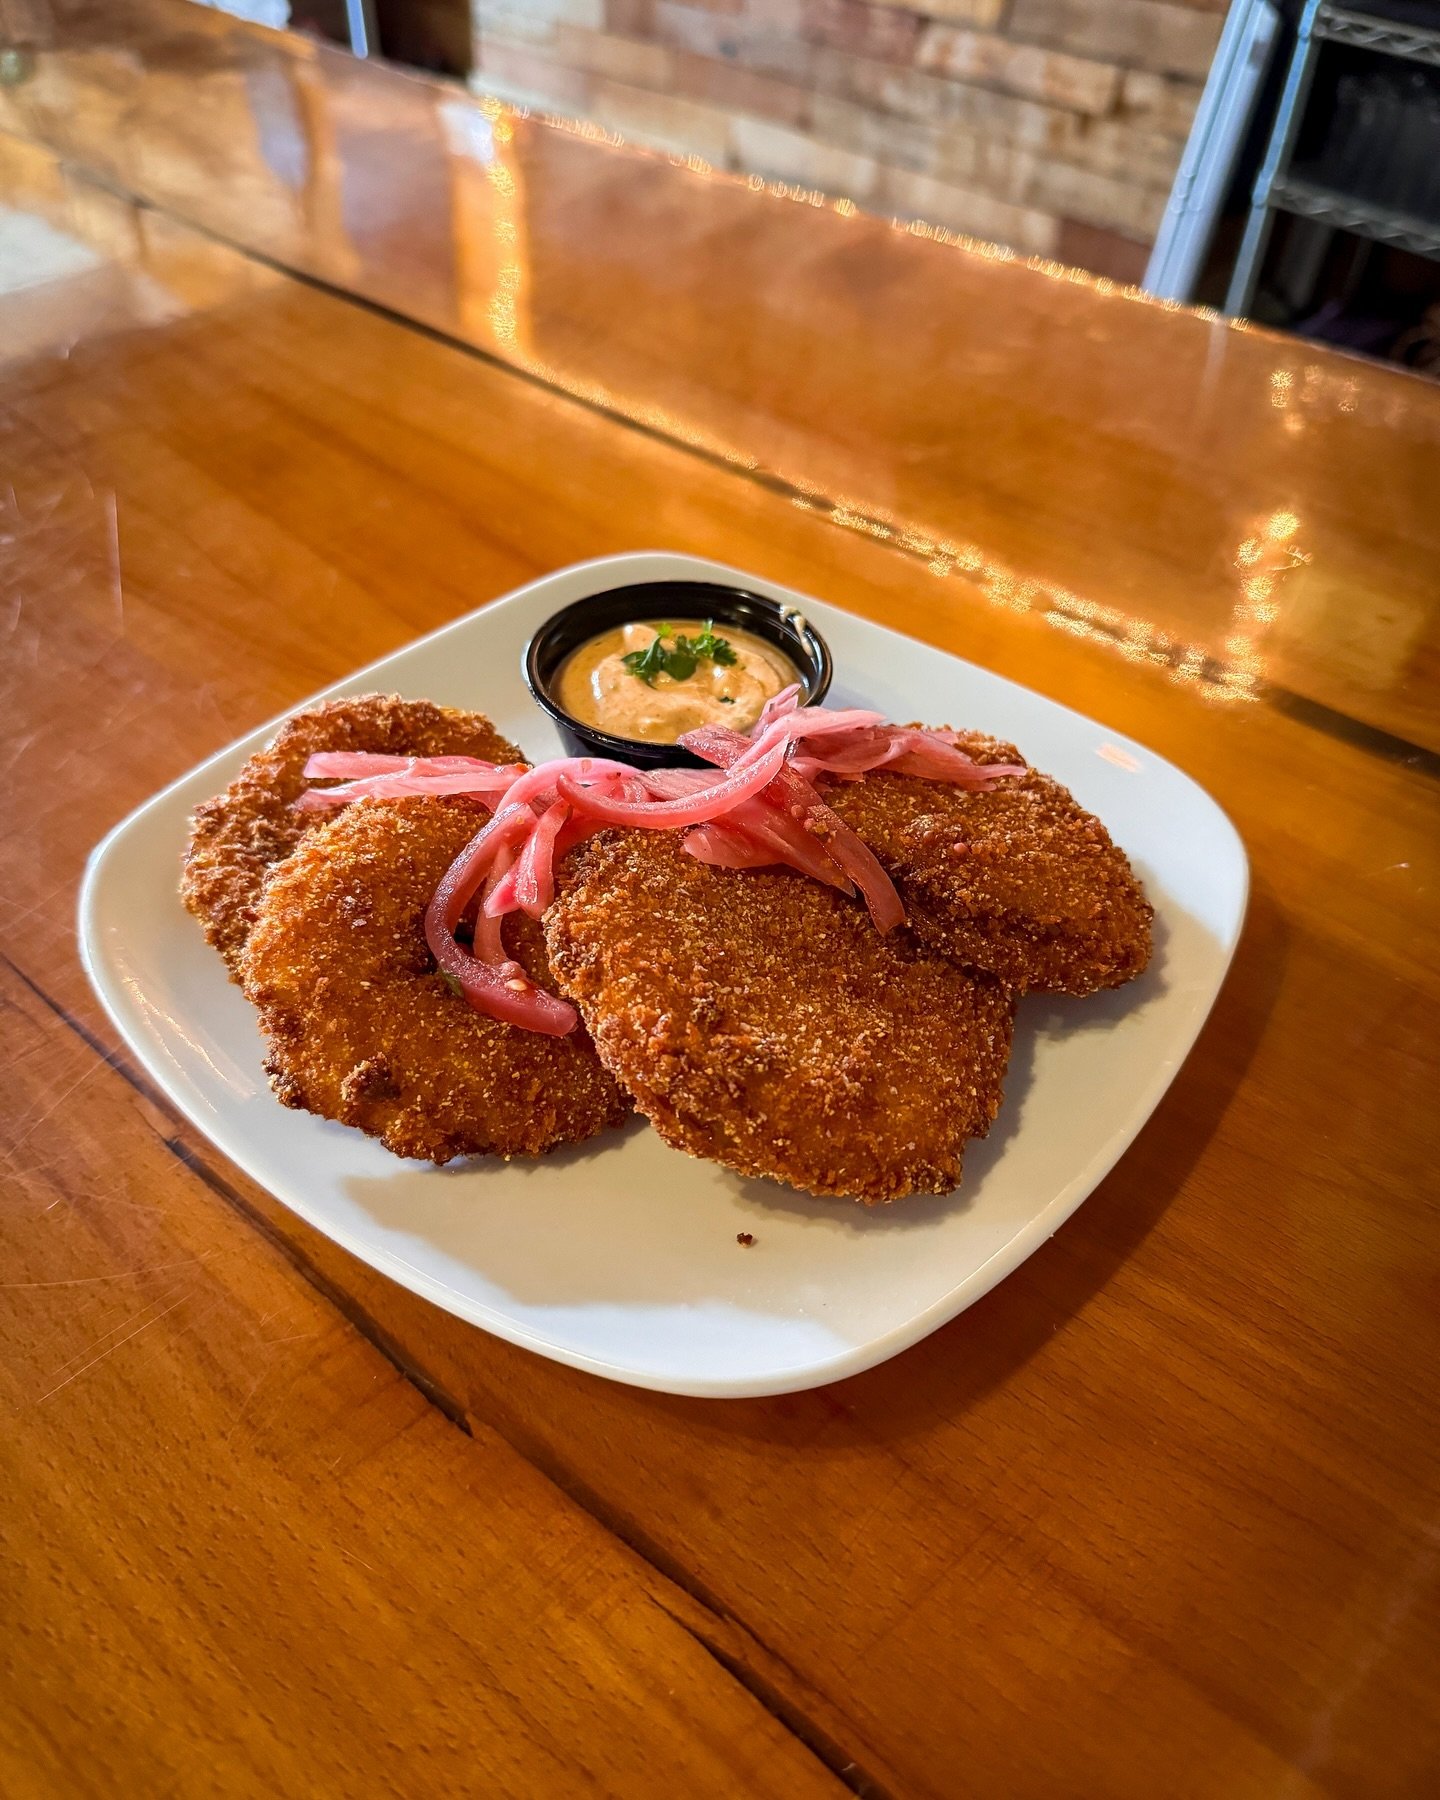 What&rsquo;s for dinner tonight??? If your answer wasn&rsquo;t FRIED GREEN TOMATOES at Ascension, you answered incorrectly. Available now and through the weekend while supplies last!

🍅🍅 Green Tomatoes breaded with Panko &amp; Cornmeal and deep-fri